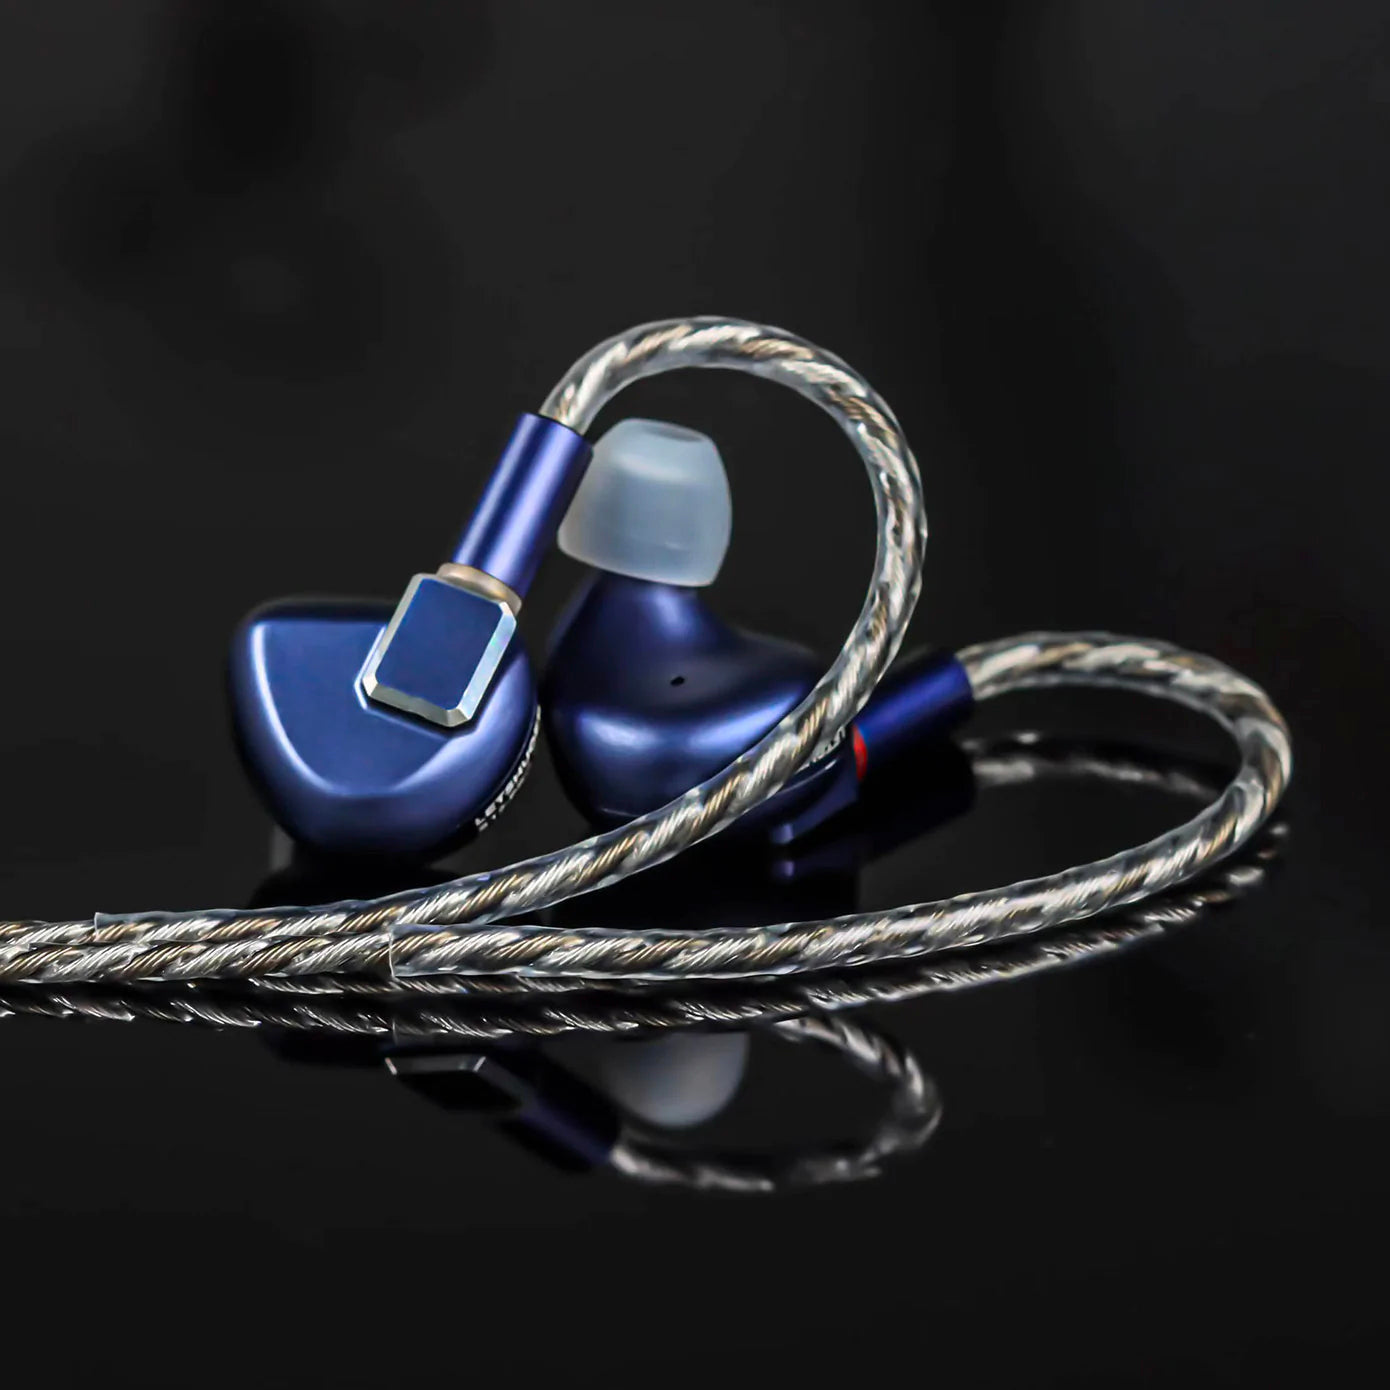 LETSHUOER S12 Pro Available Now On Pre-Order: Your Favorite Planar Driver IEM With Upgraded Stock Cable